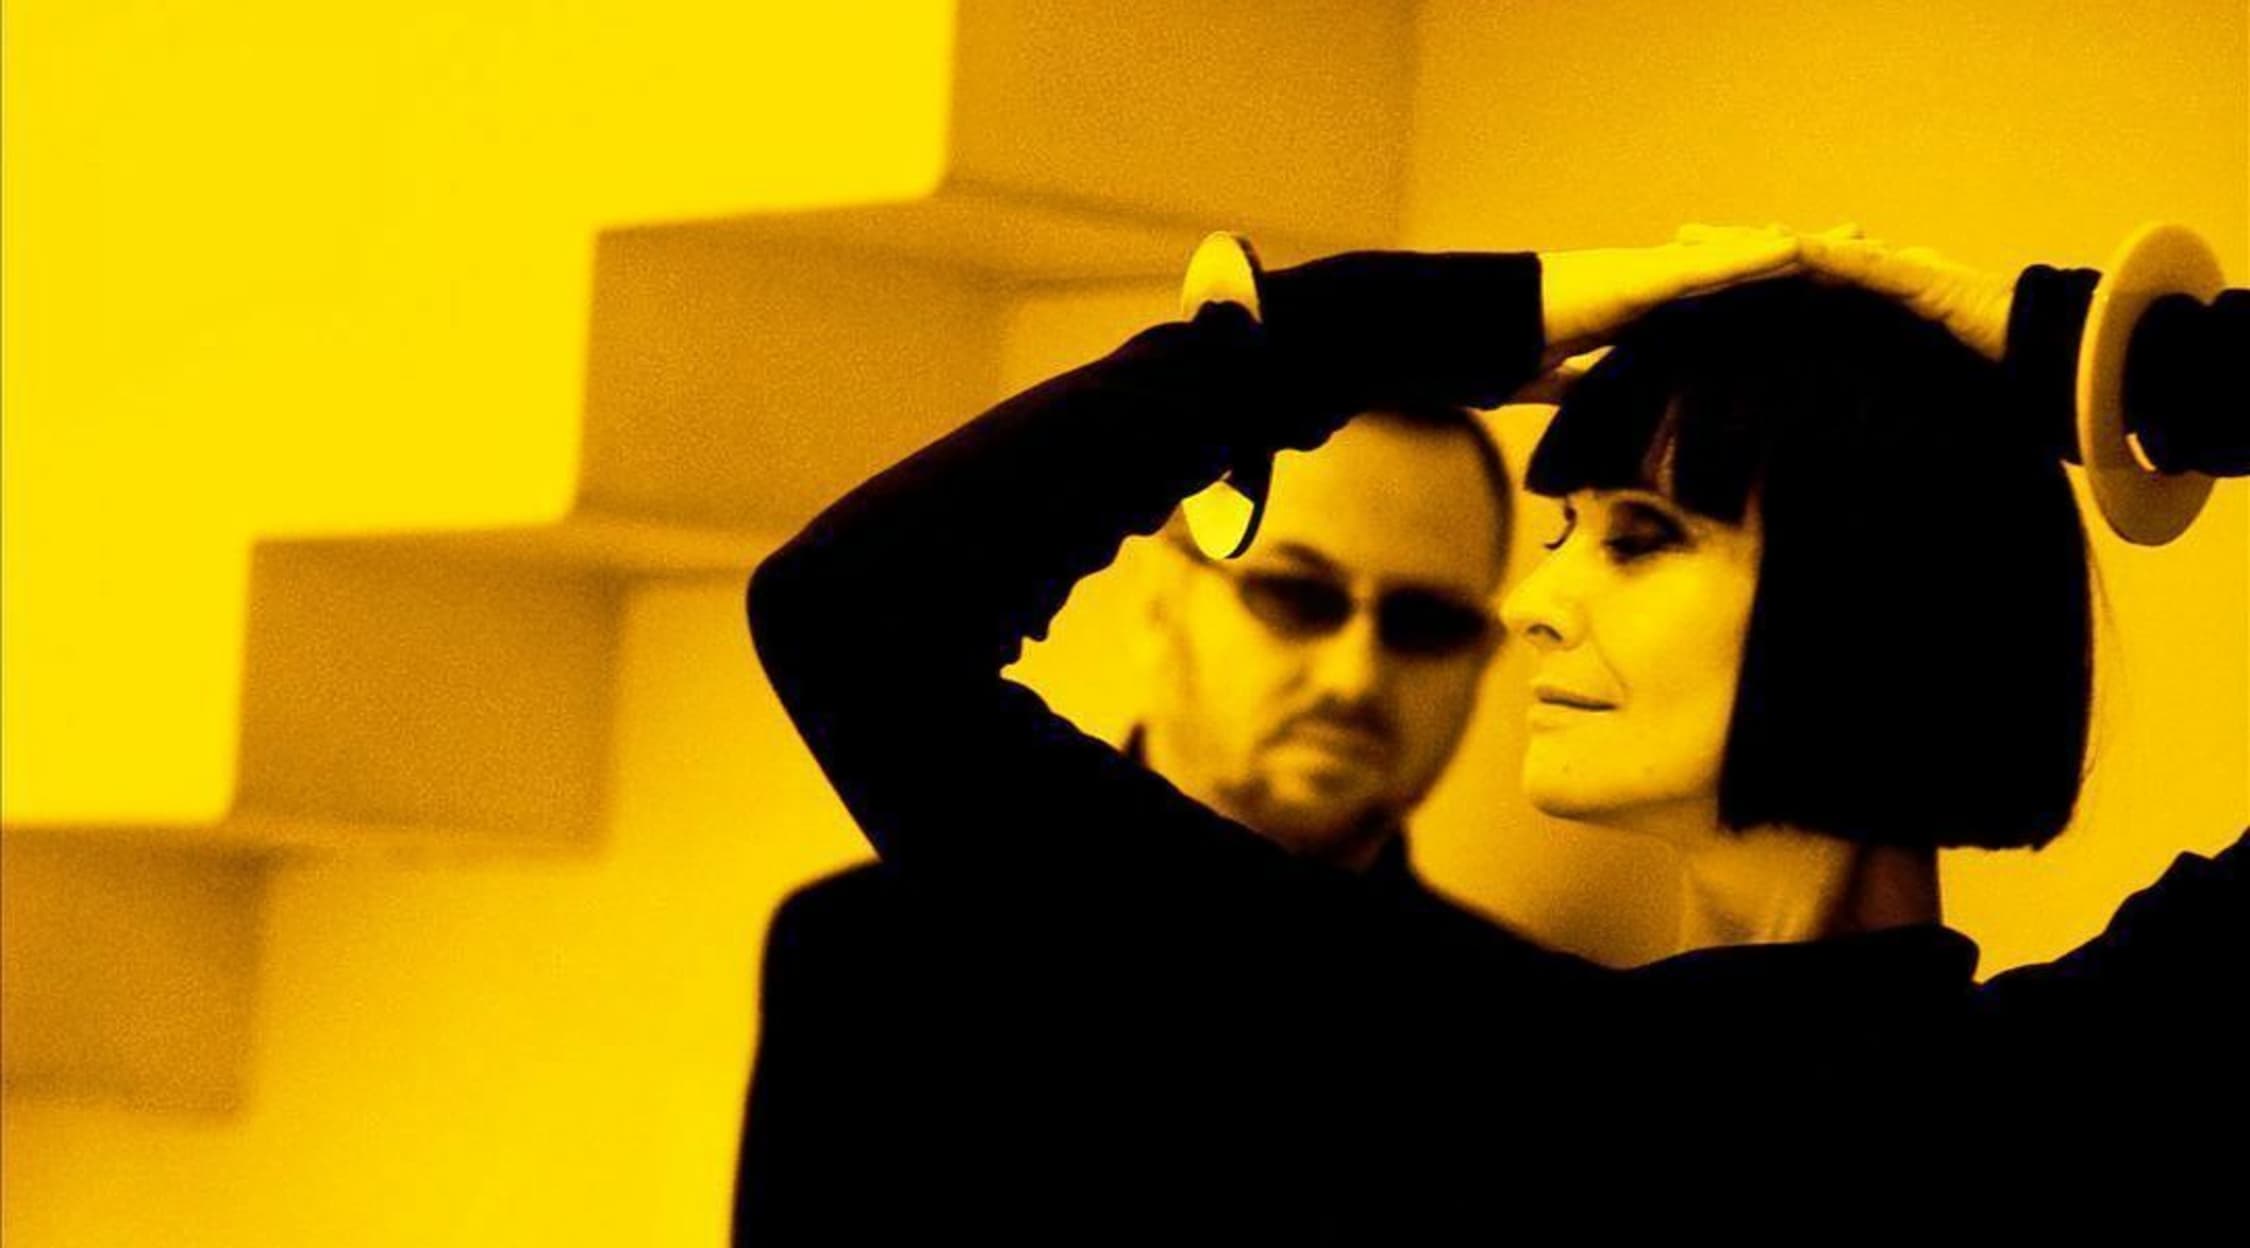 Swing Out Sister Tickets Swing Out Sister Concert Tickets and Tour